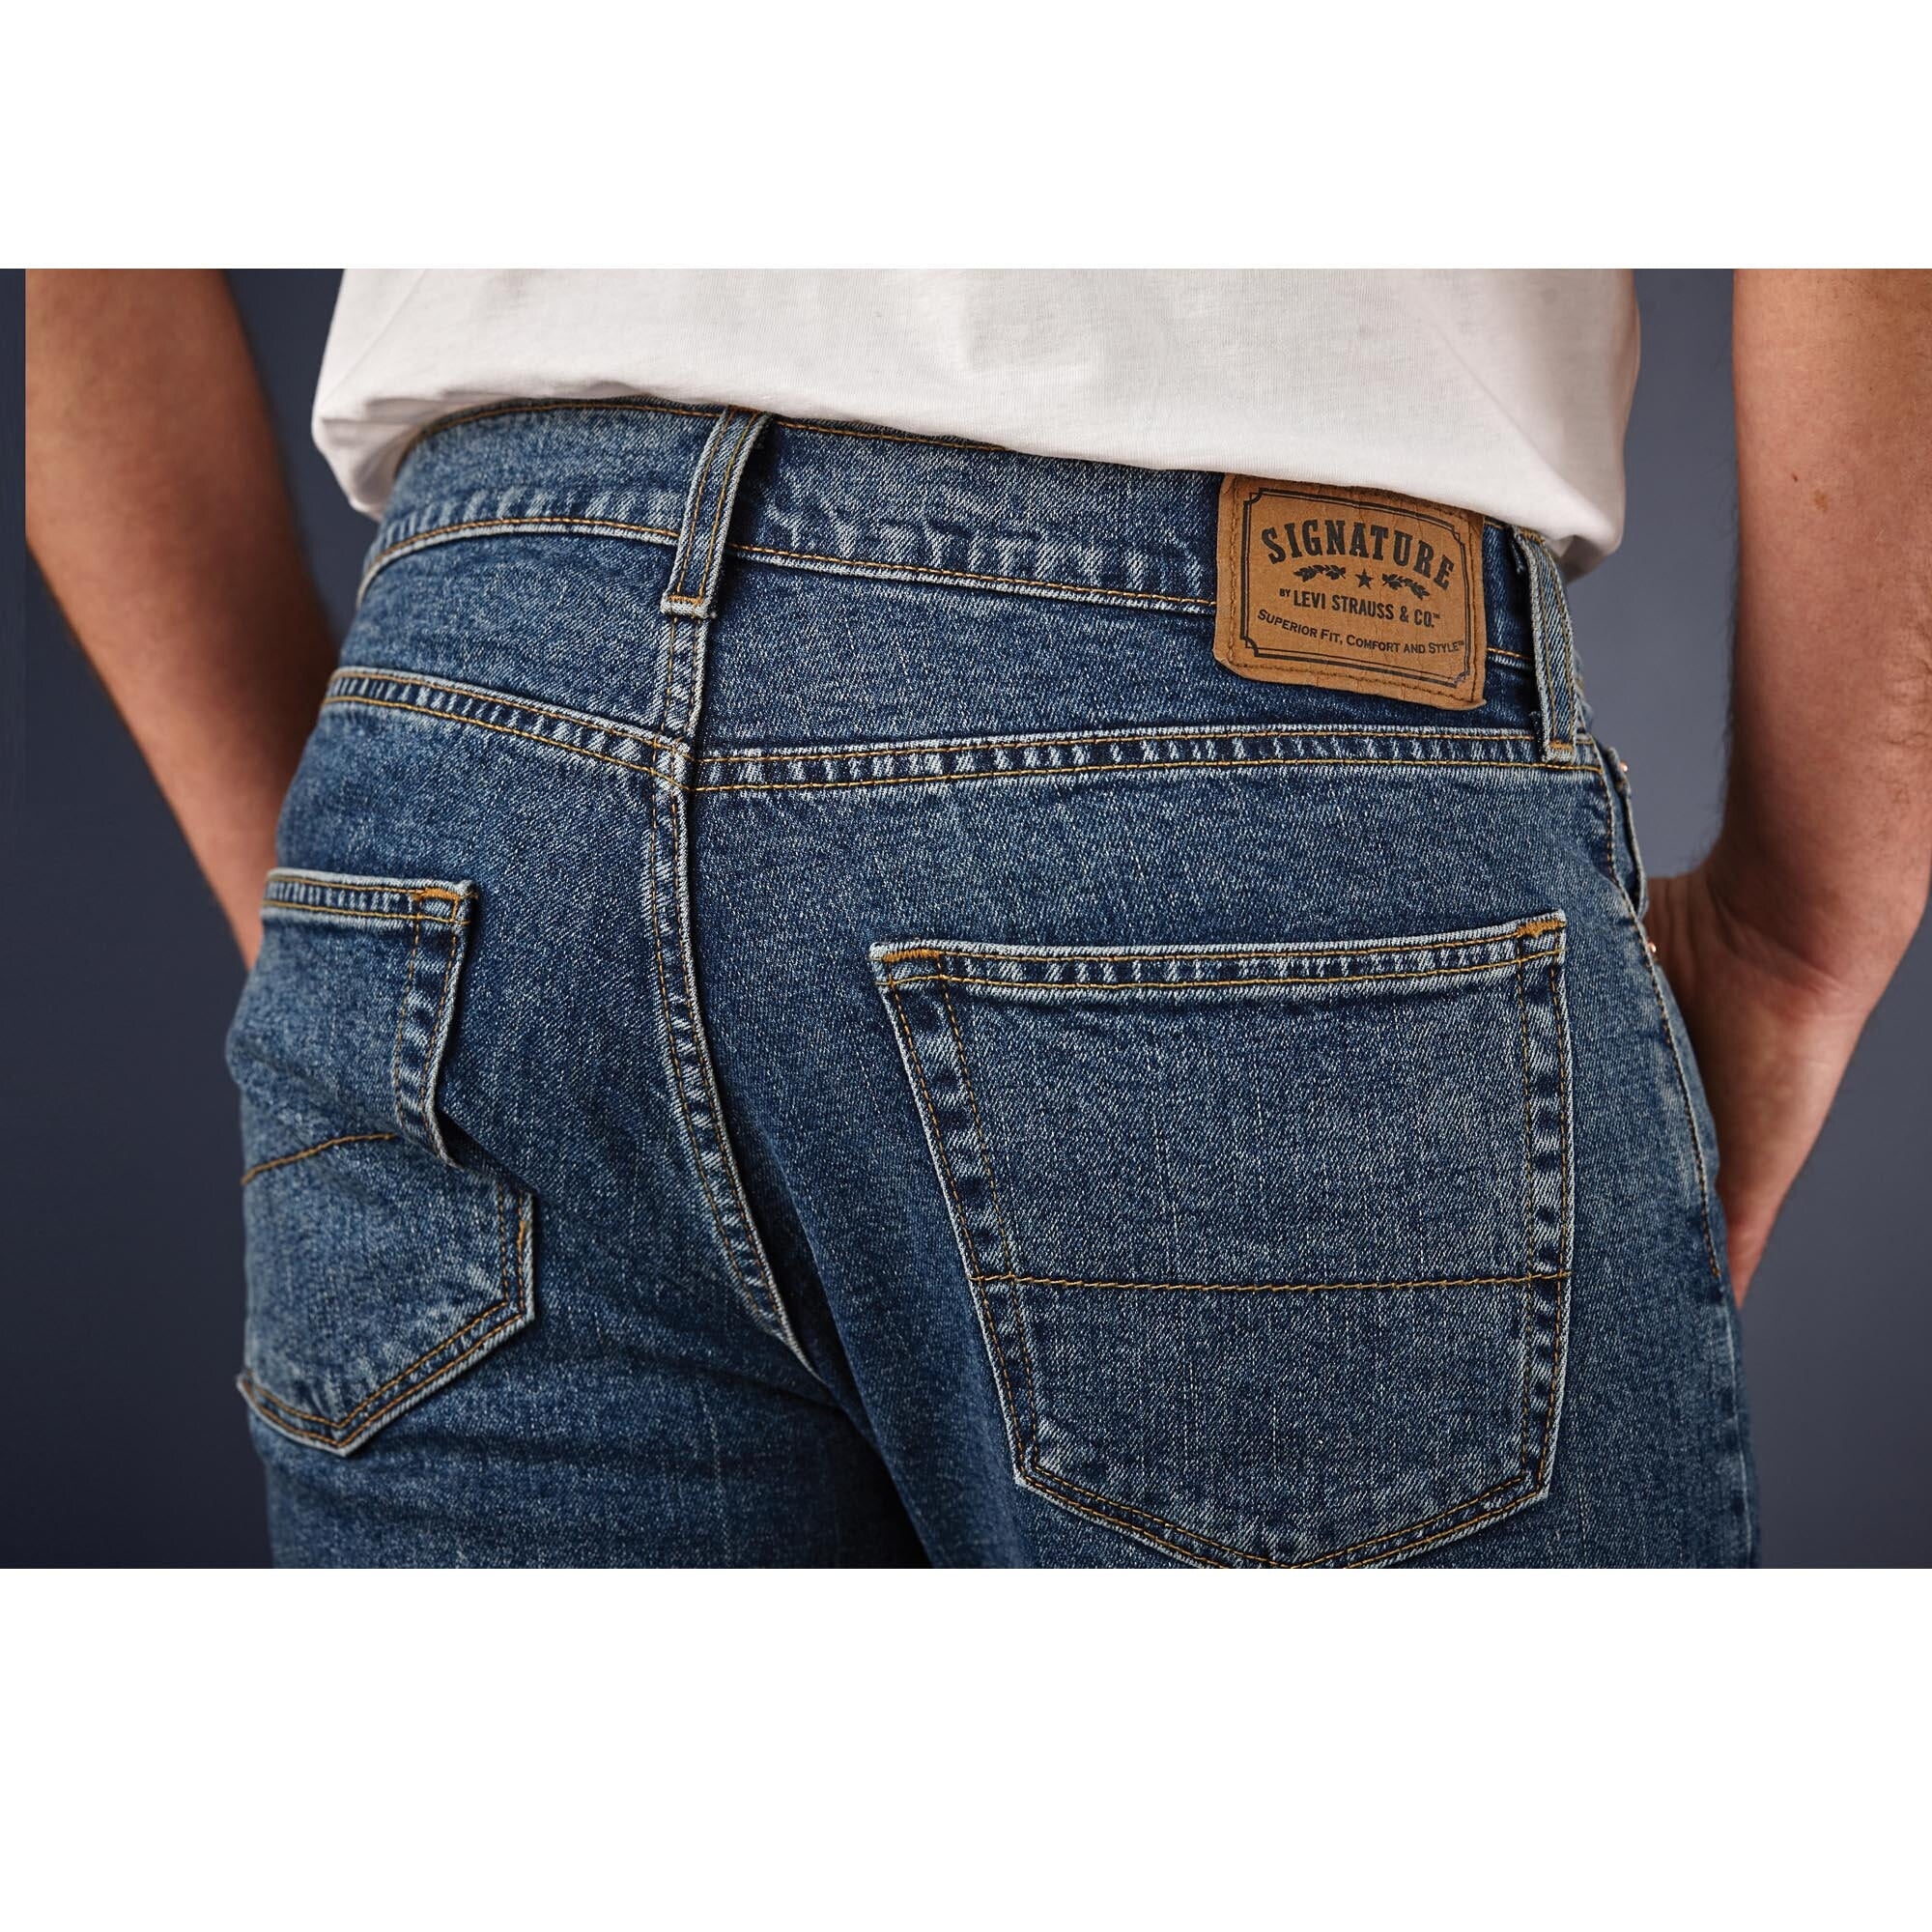 Levi Strauss & Co. Signature Men's Straight Fit Jeans – Giant Tiger